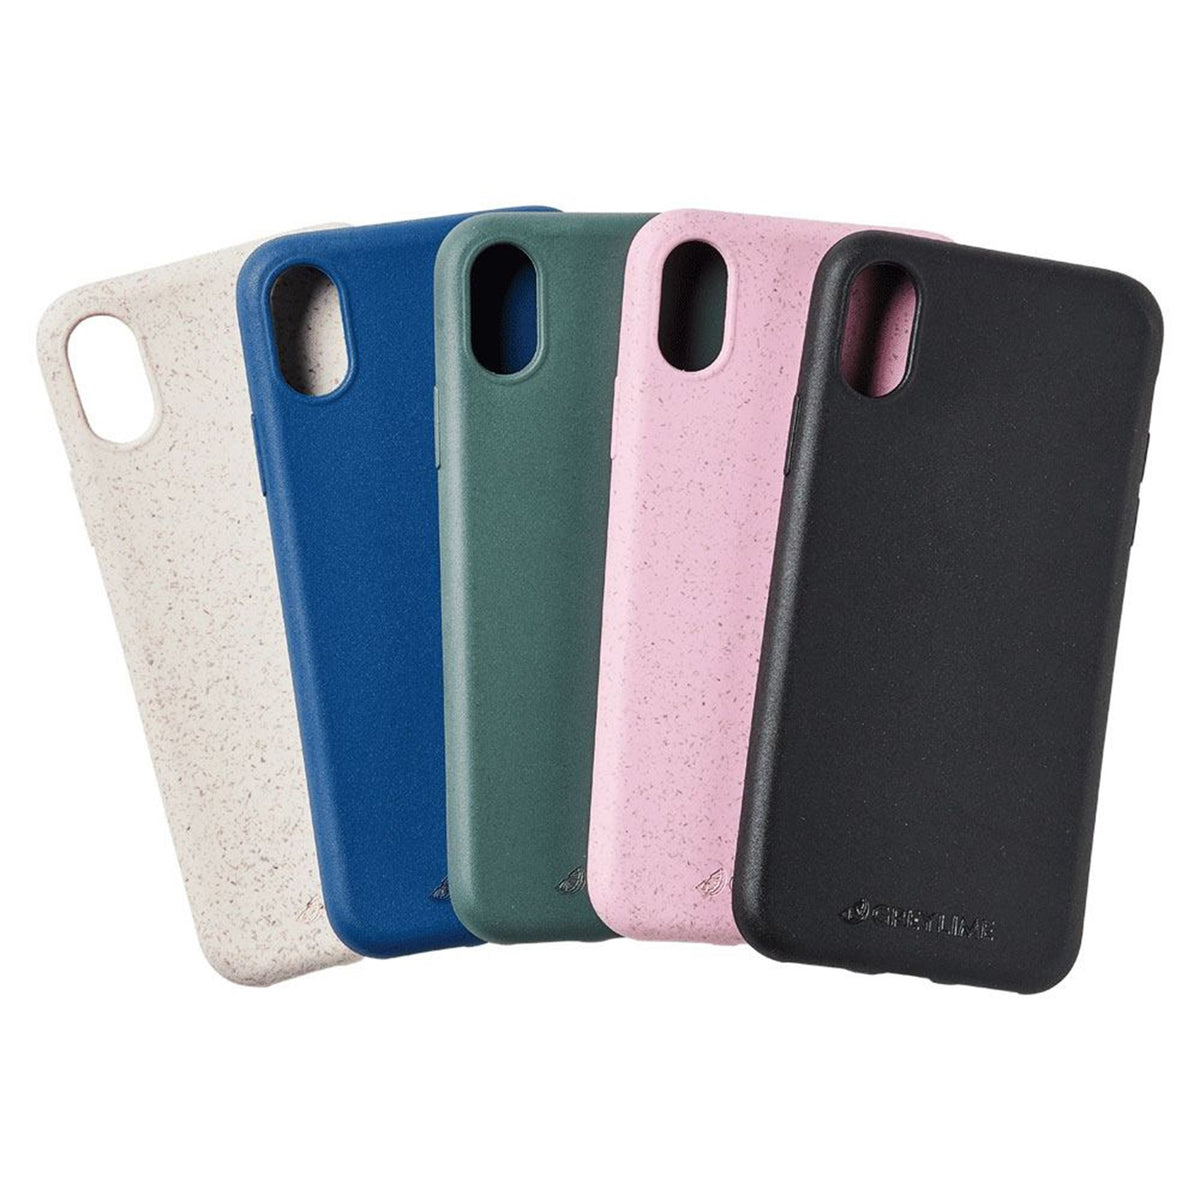 GreyLime-iPhone-X-XS-biodegradable-cover-COIPXXS-gruppe-1.jpg